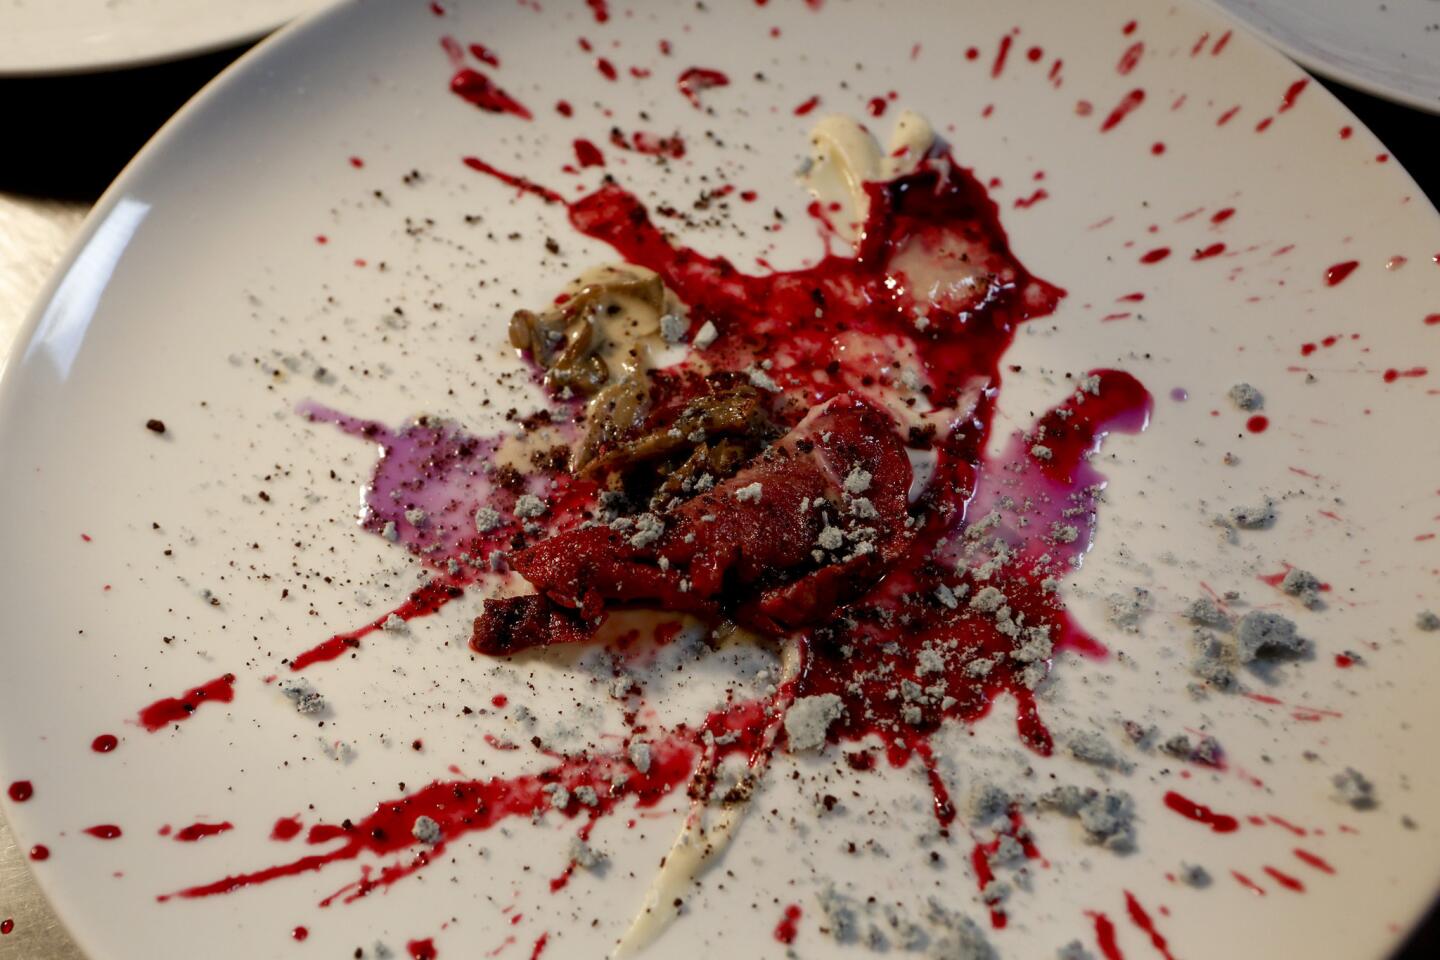 The Wolvesmouth signature dish, "Wolves in the Snow," with venison, pine gelee, blueberry meringue, cauliflower puree, hen of the woods mushrooms, cocoa coffee crumble, cabbage and blackberry.